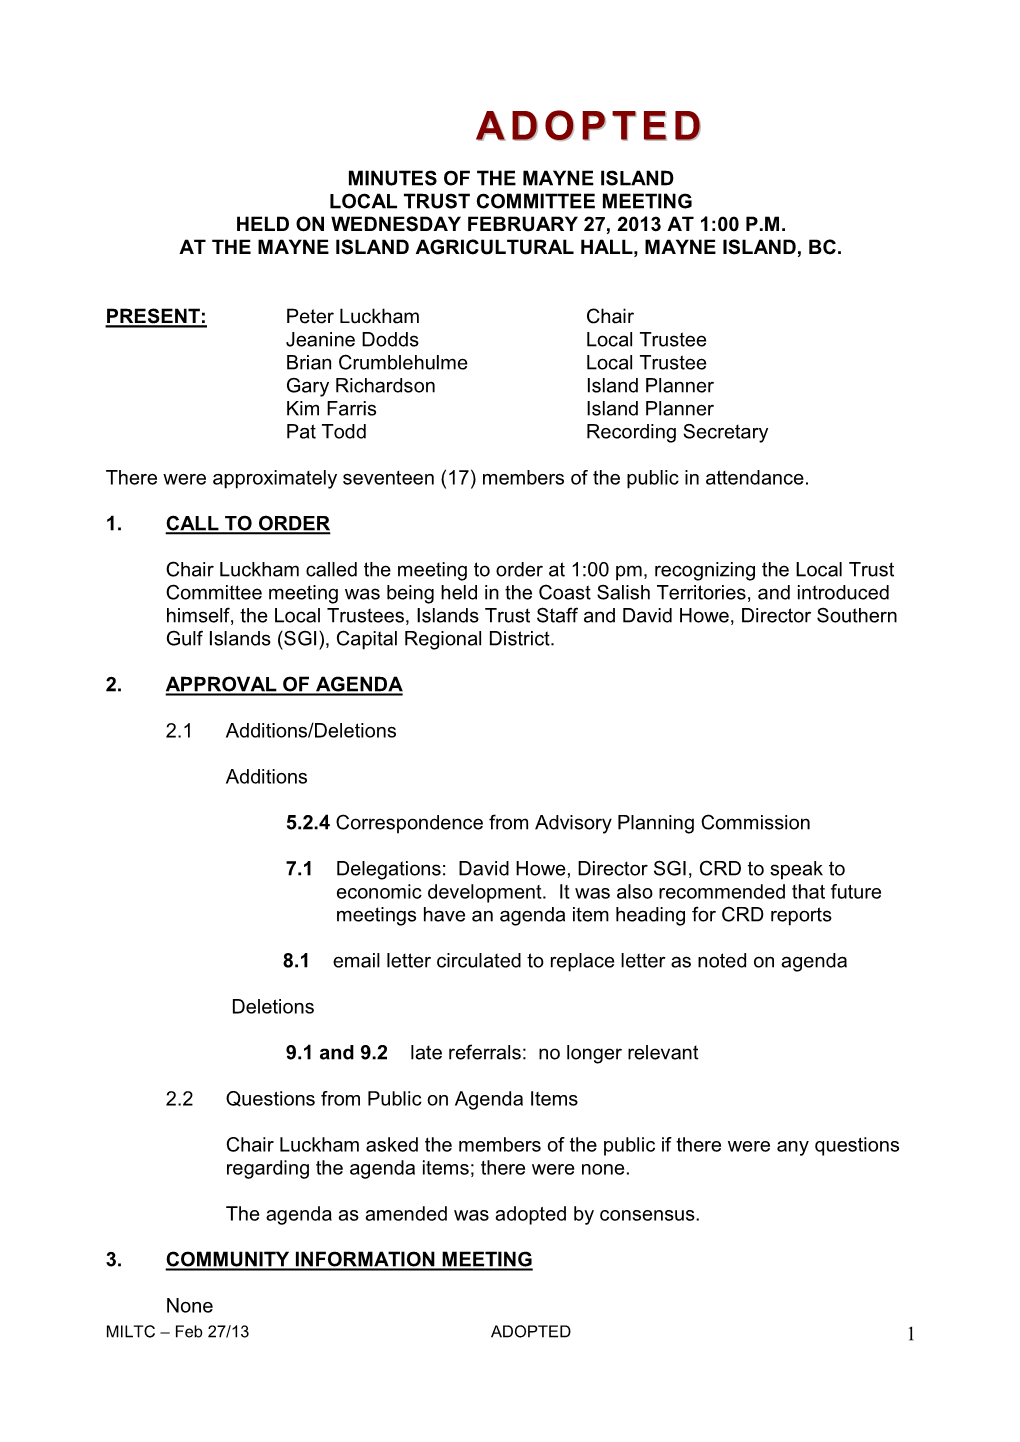 Adopted Minutes of the Mayne Island Local Trust Committee Meeting Held on Wednesday February 27, 2013 at 1:00 P.M